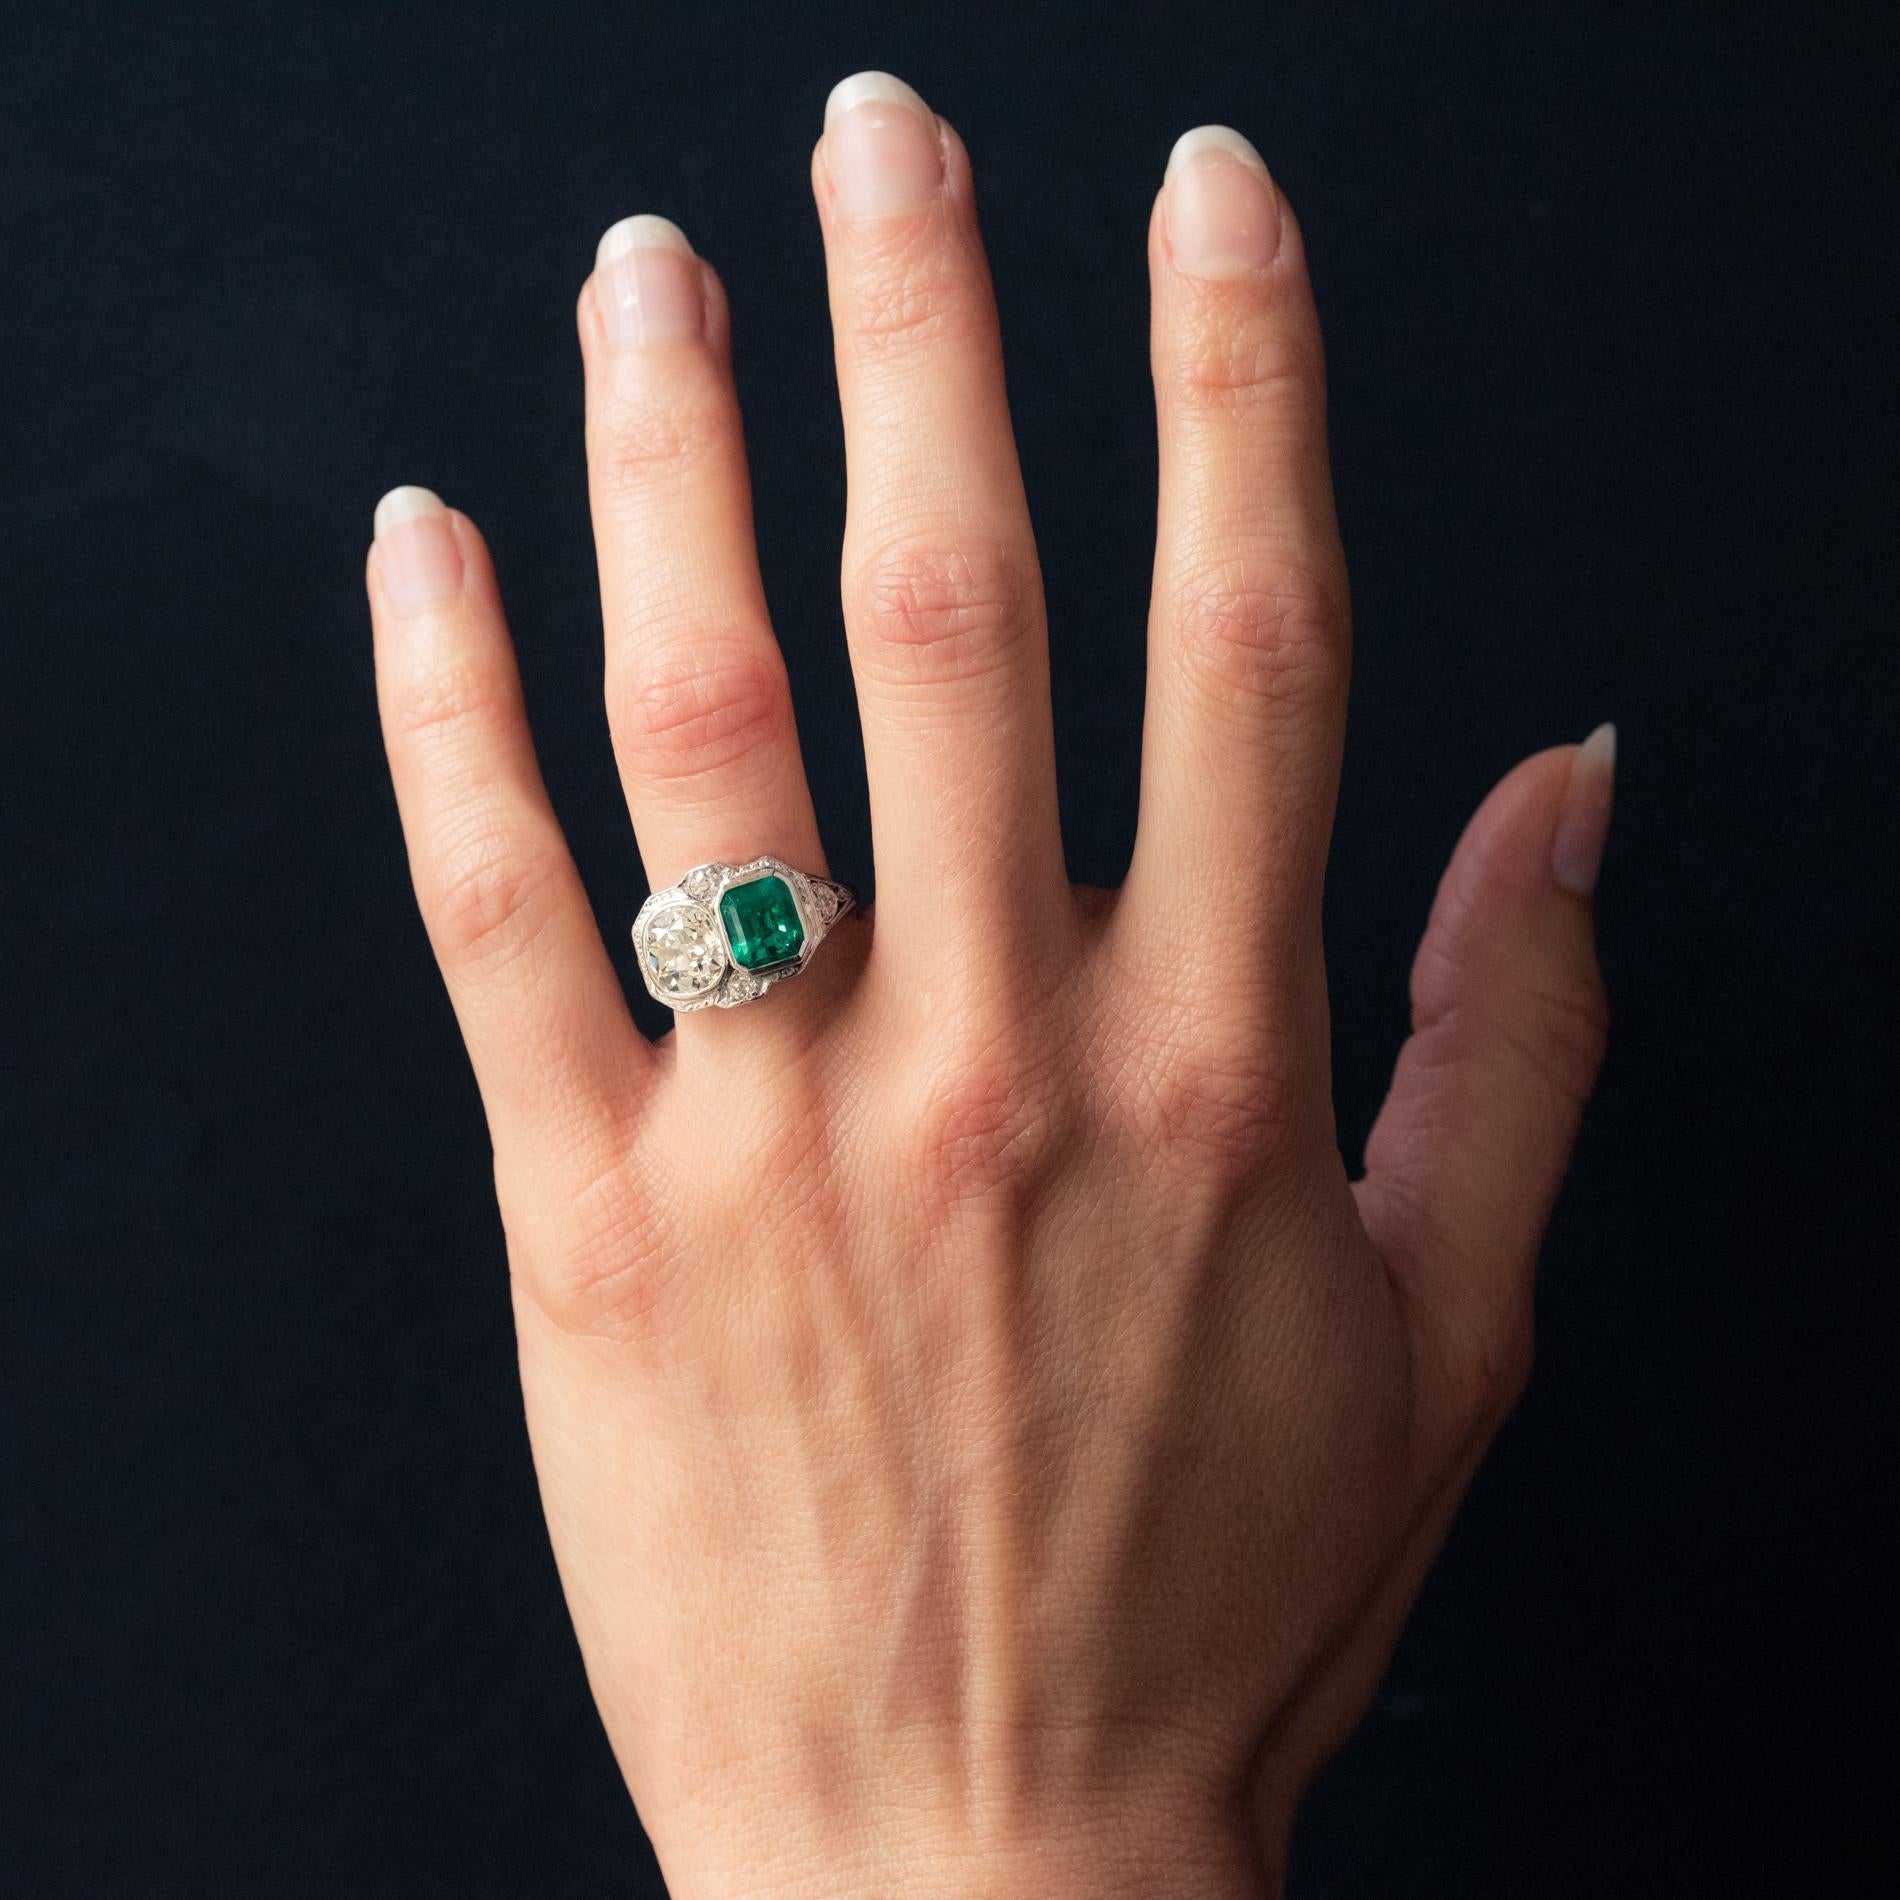 Ring in platinum.
Sublime art deco ring, its entire platinum setting is closed set on its top with a Colombian emerald- cut emerald and an antique- cut diamond. This duo of gems is surmounted on either side by an antique brilliant- cut diamond. The